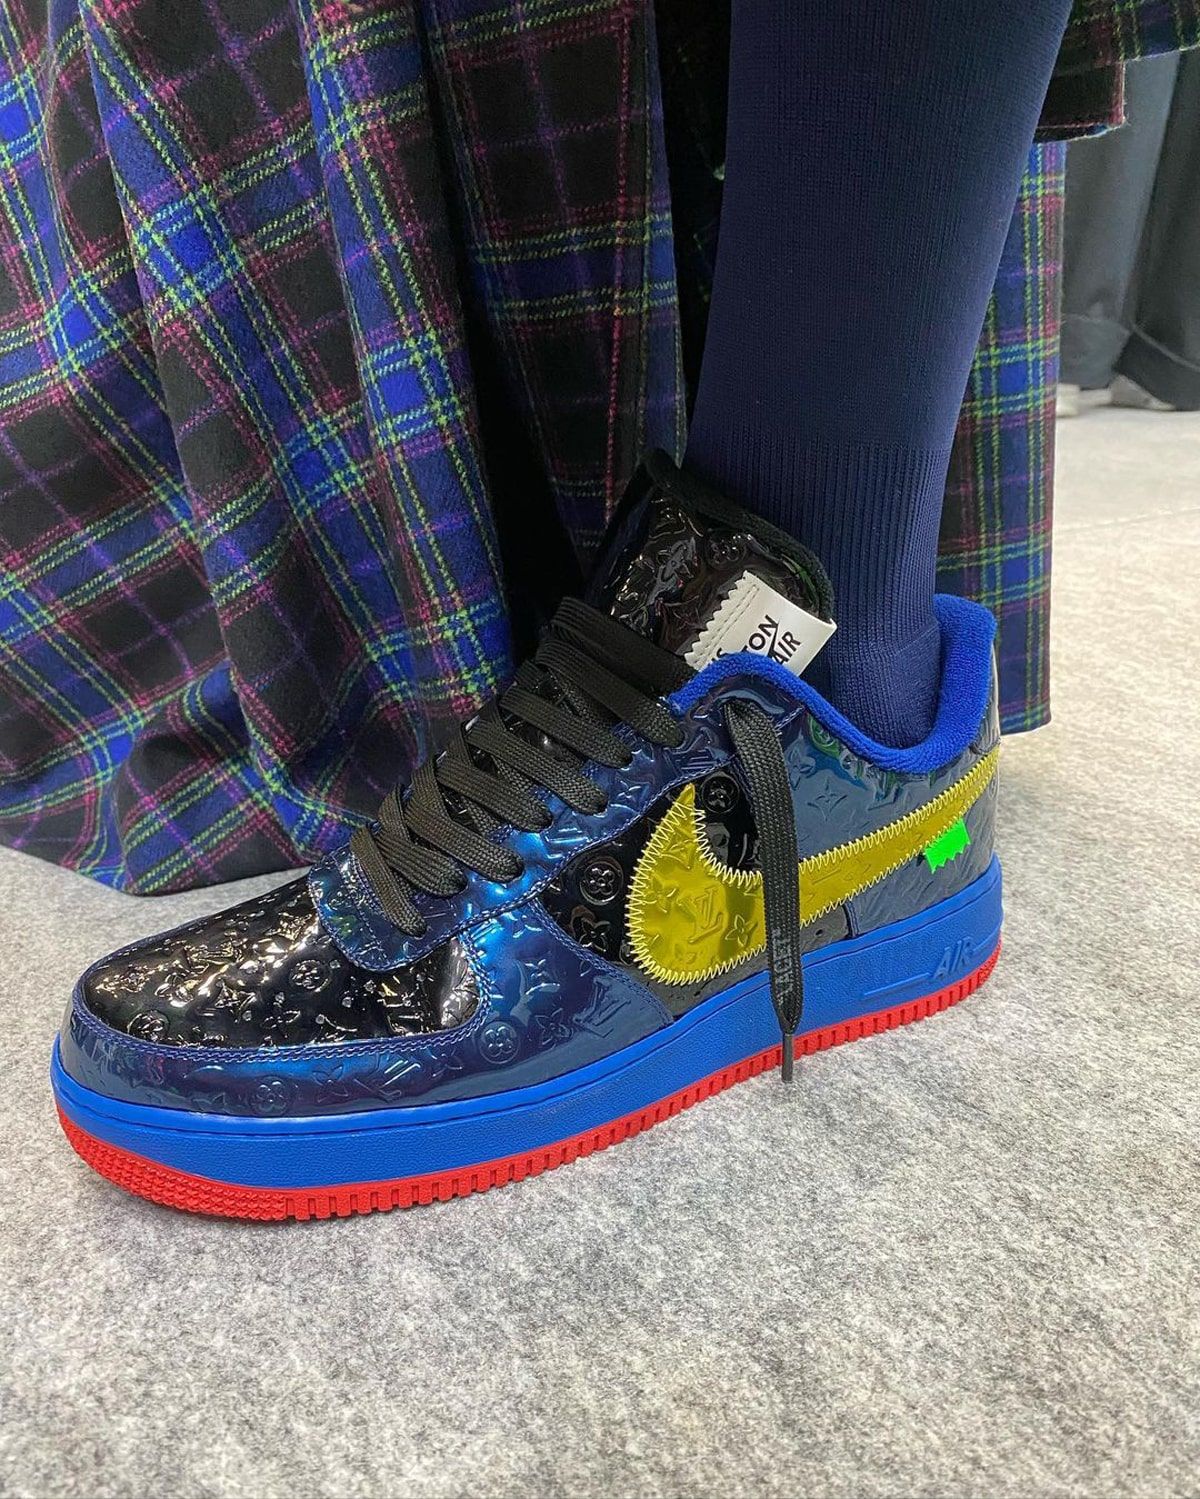 Louis Vuitton X Nike Air Force 1 By Virgil Abloh Gets Release Date